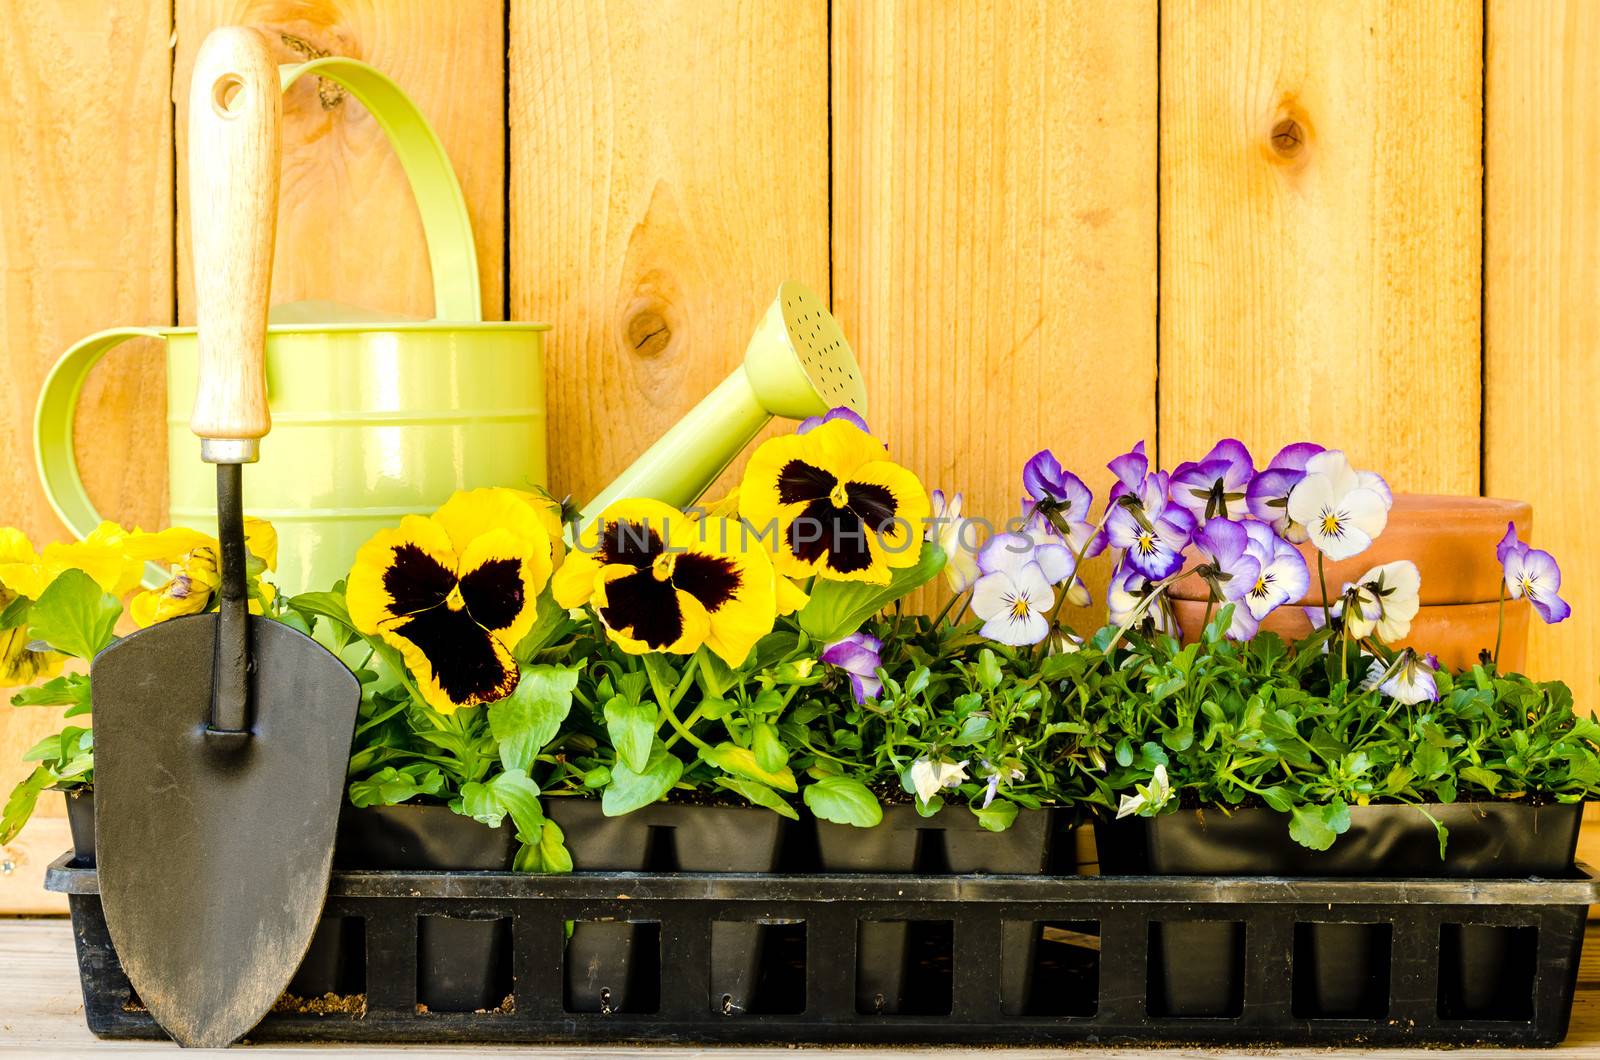 Garden planting with pansies, violas, watering can, trowel, and pots on wood background.